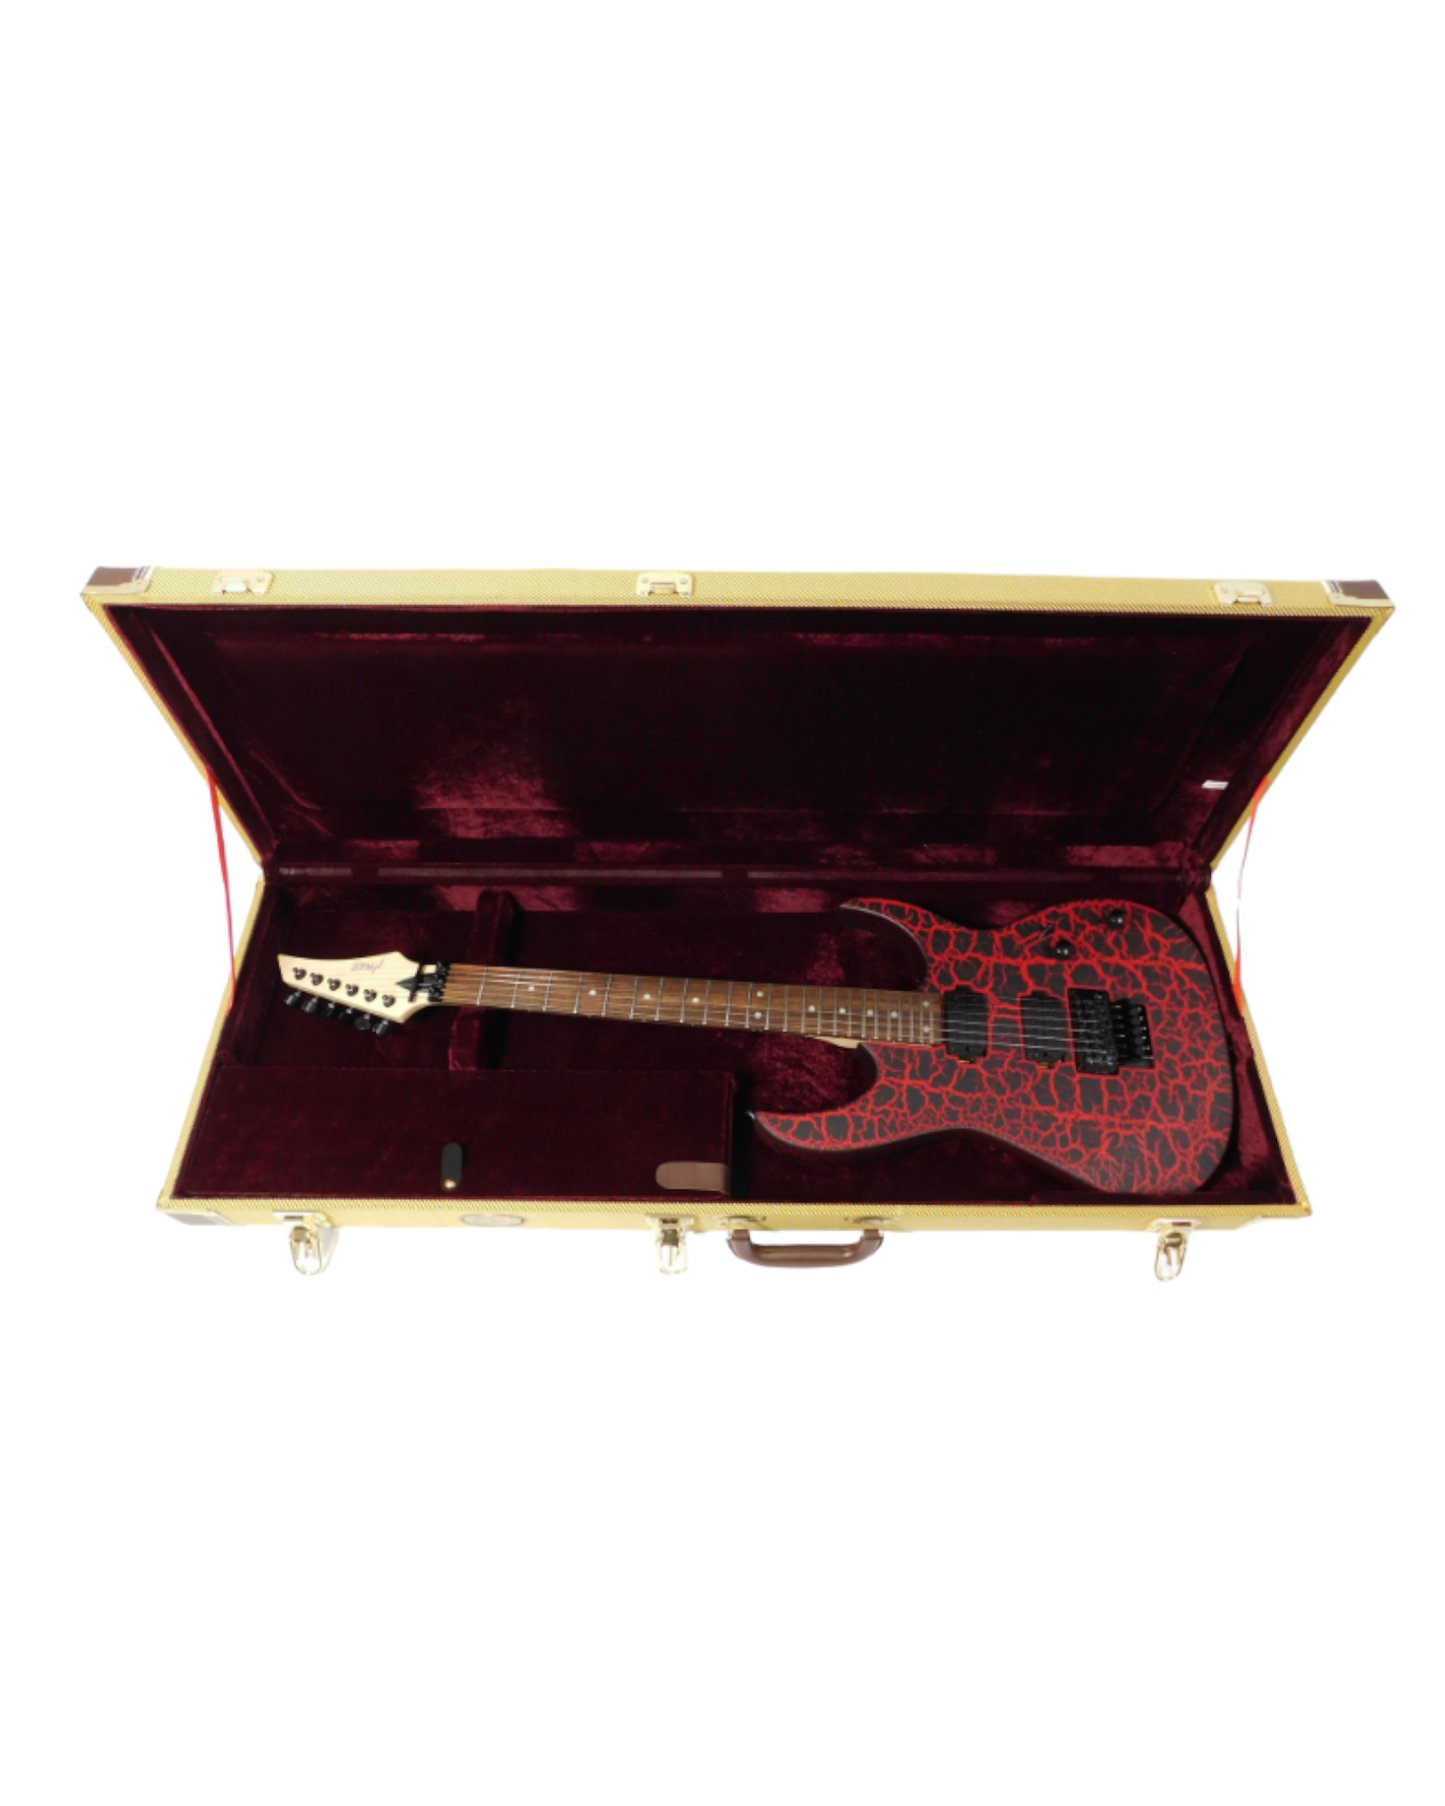 Haze HPAG19040STBY Electric Guitar Hard Case